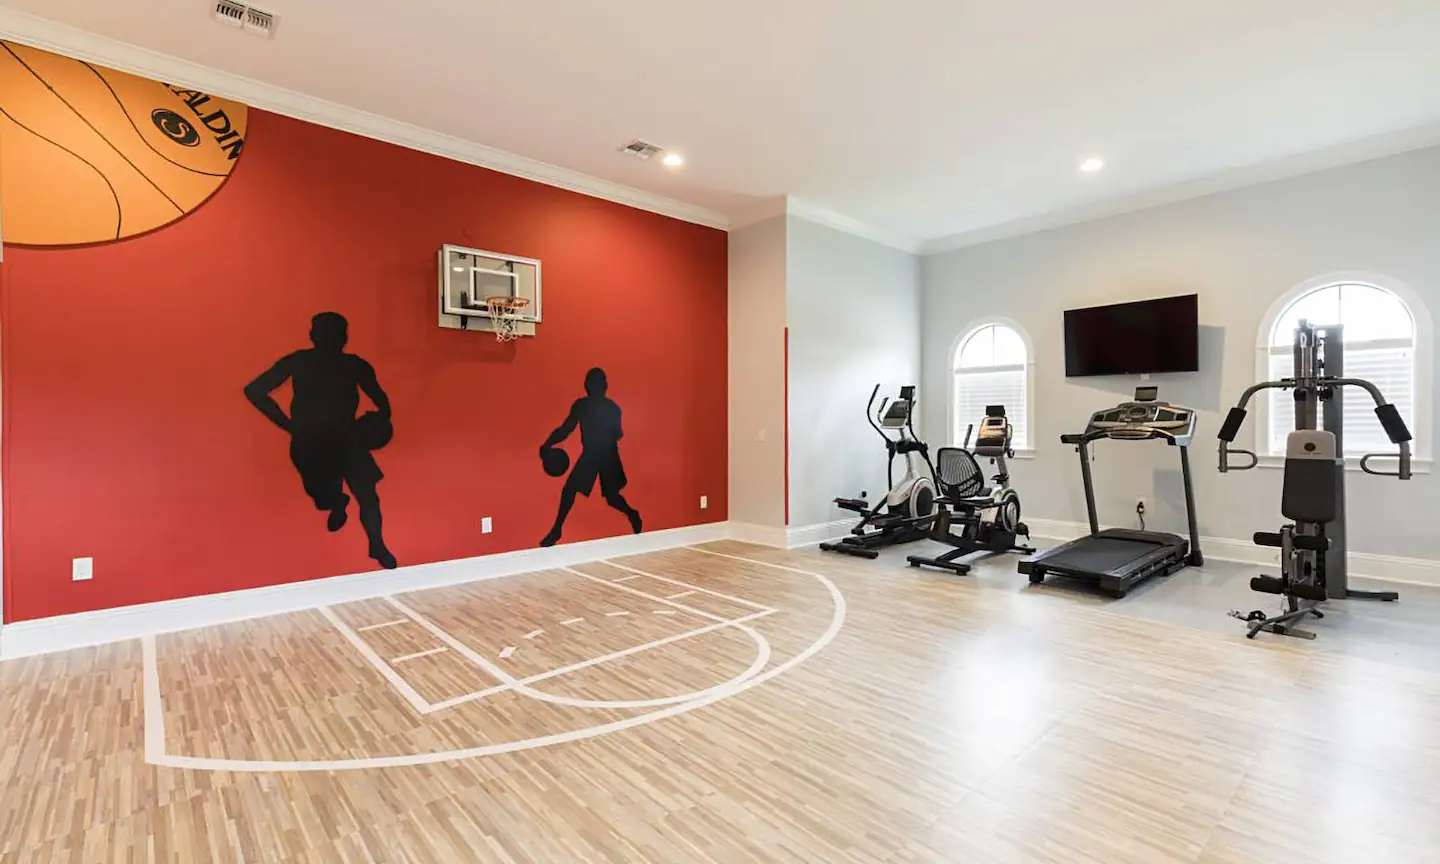 Have fun and exercise in this basketball court and gym.